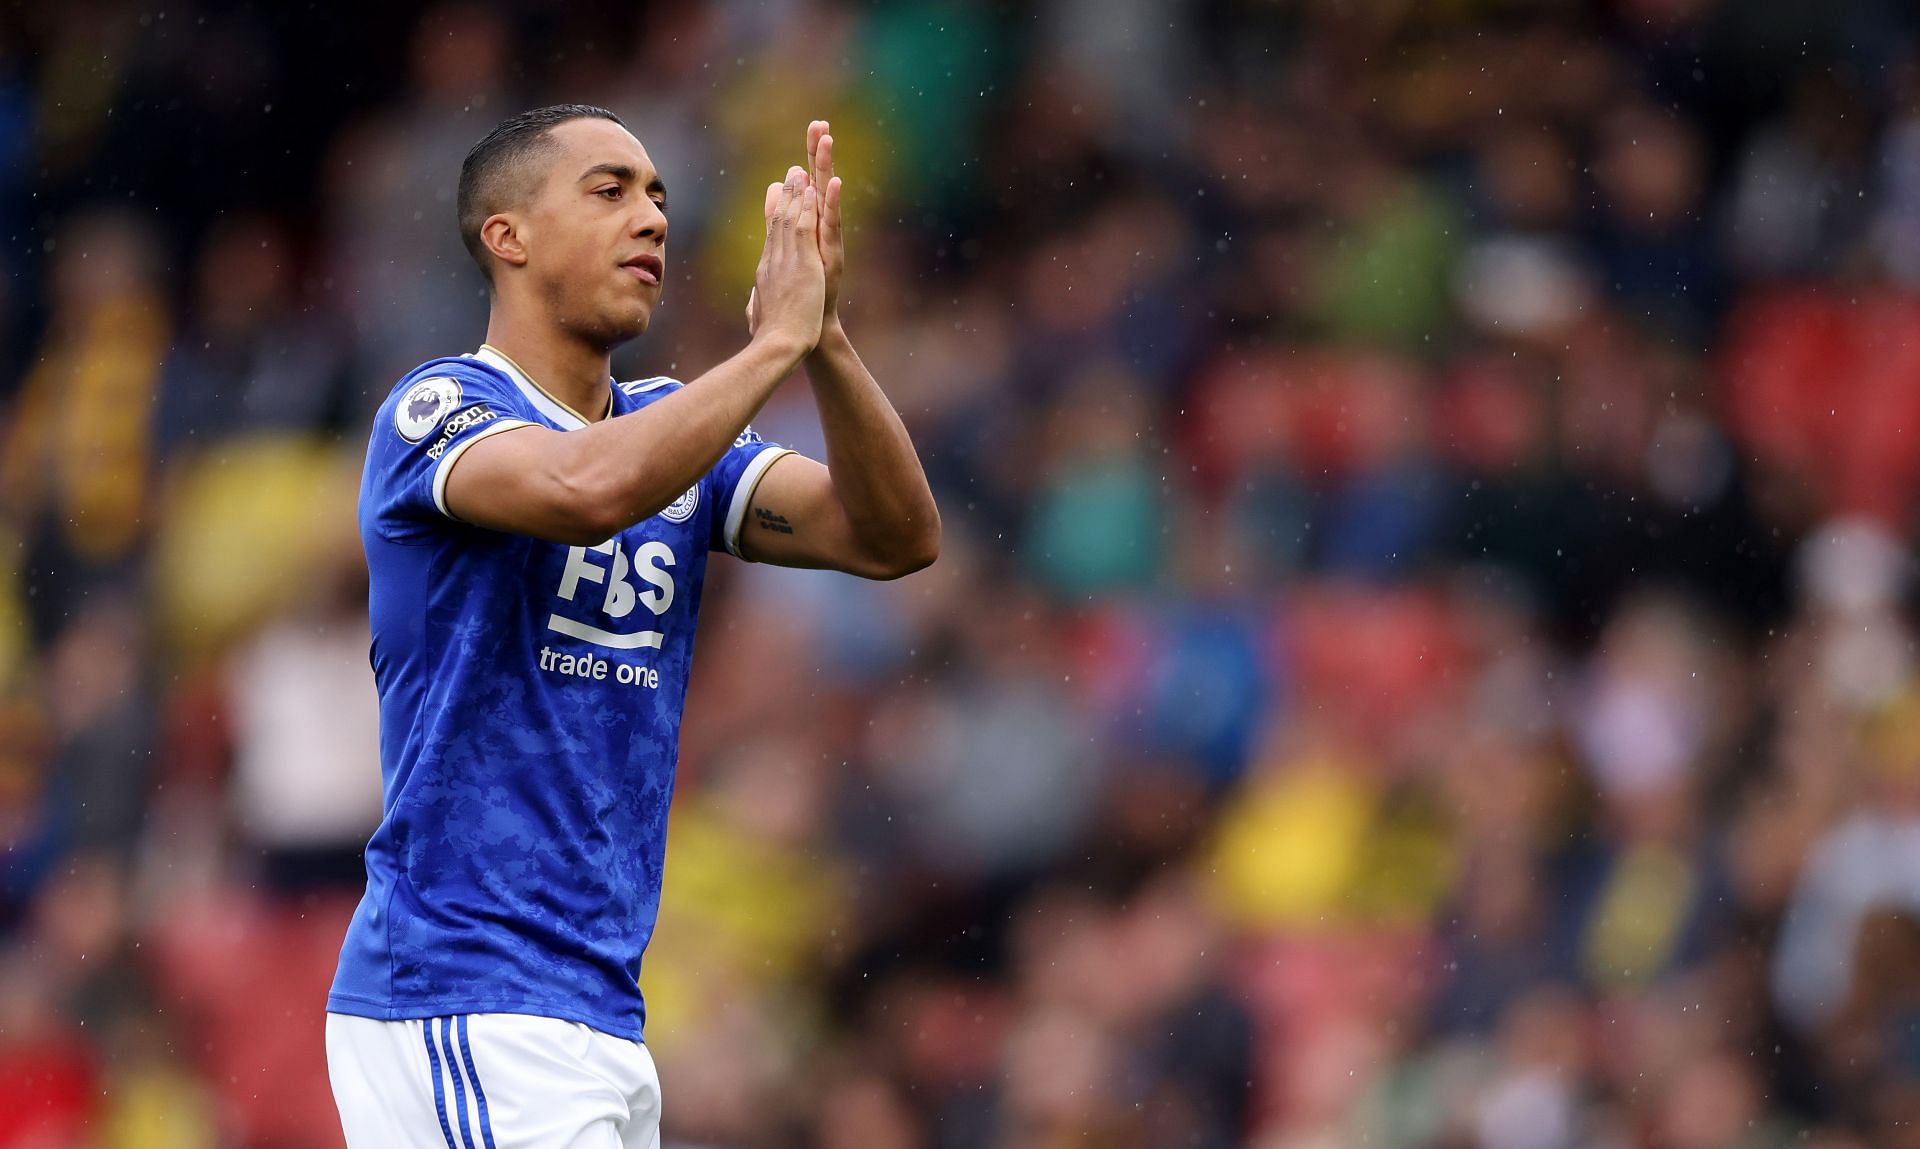 Tielemans has one year left on his Leicester City contract